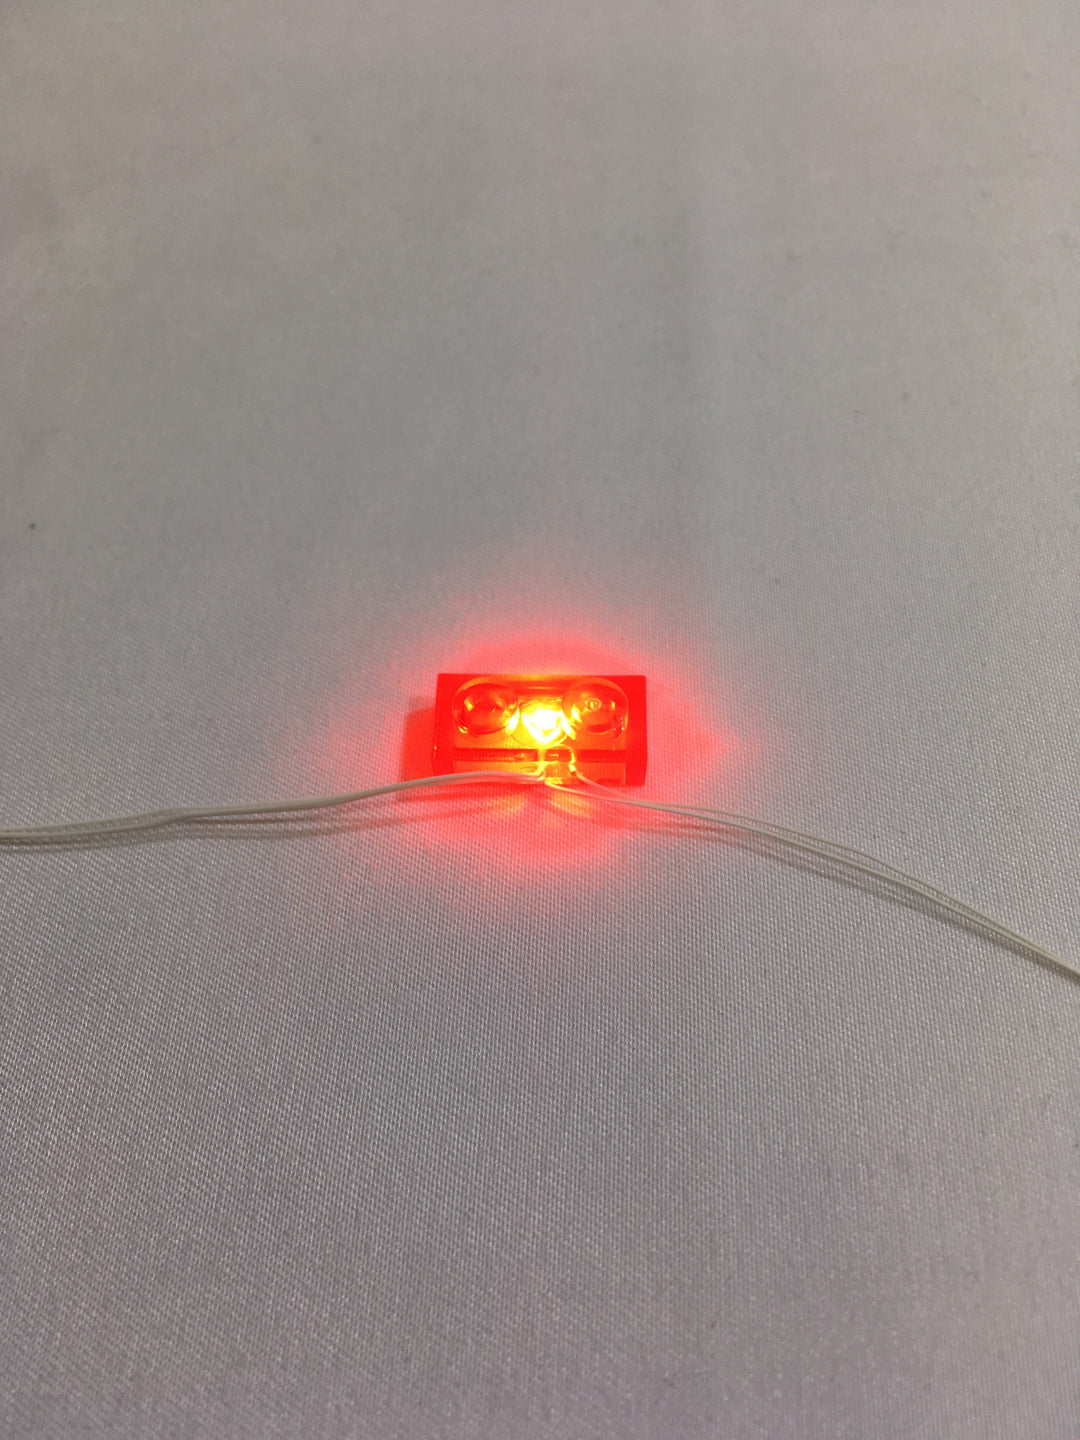 1x2-Orange-Translucent-Plate-LED-LIGHT-LINX-Create-Your-Own-LED-String-works-with-LEGO-bricks-by-Brick-Loot